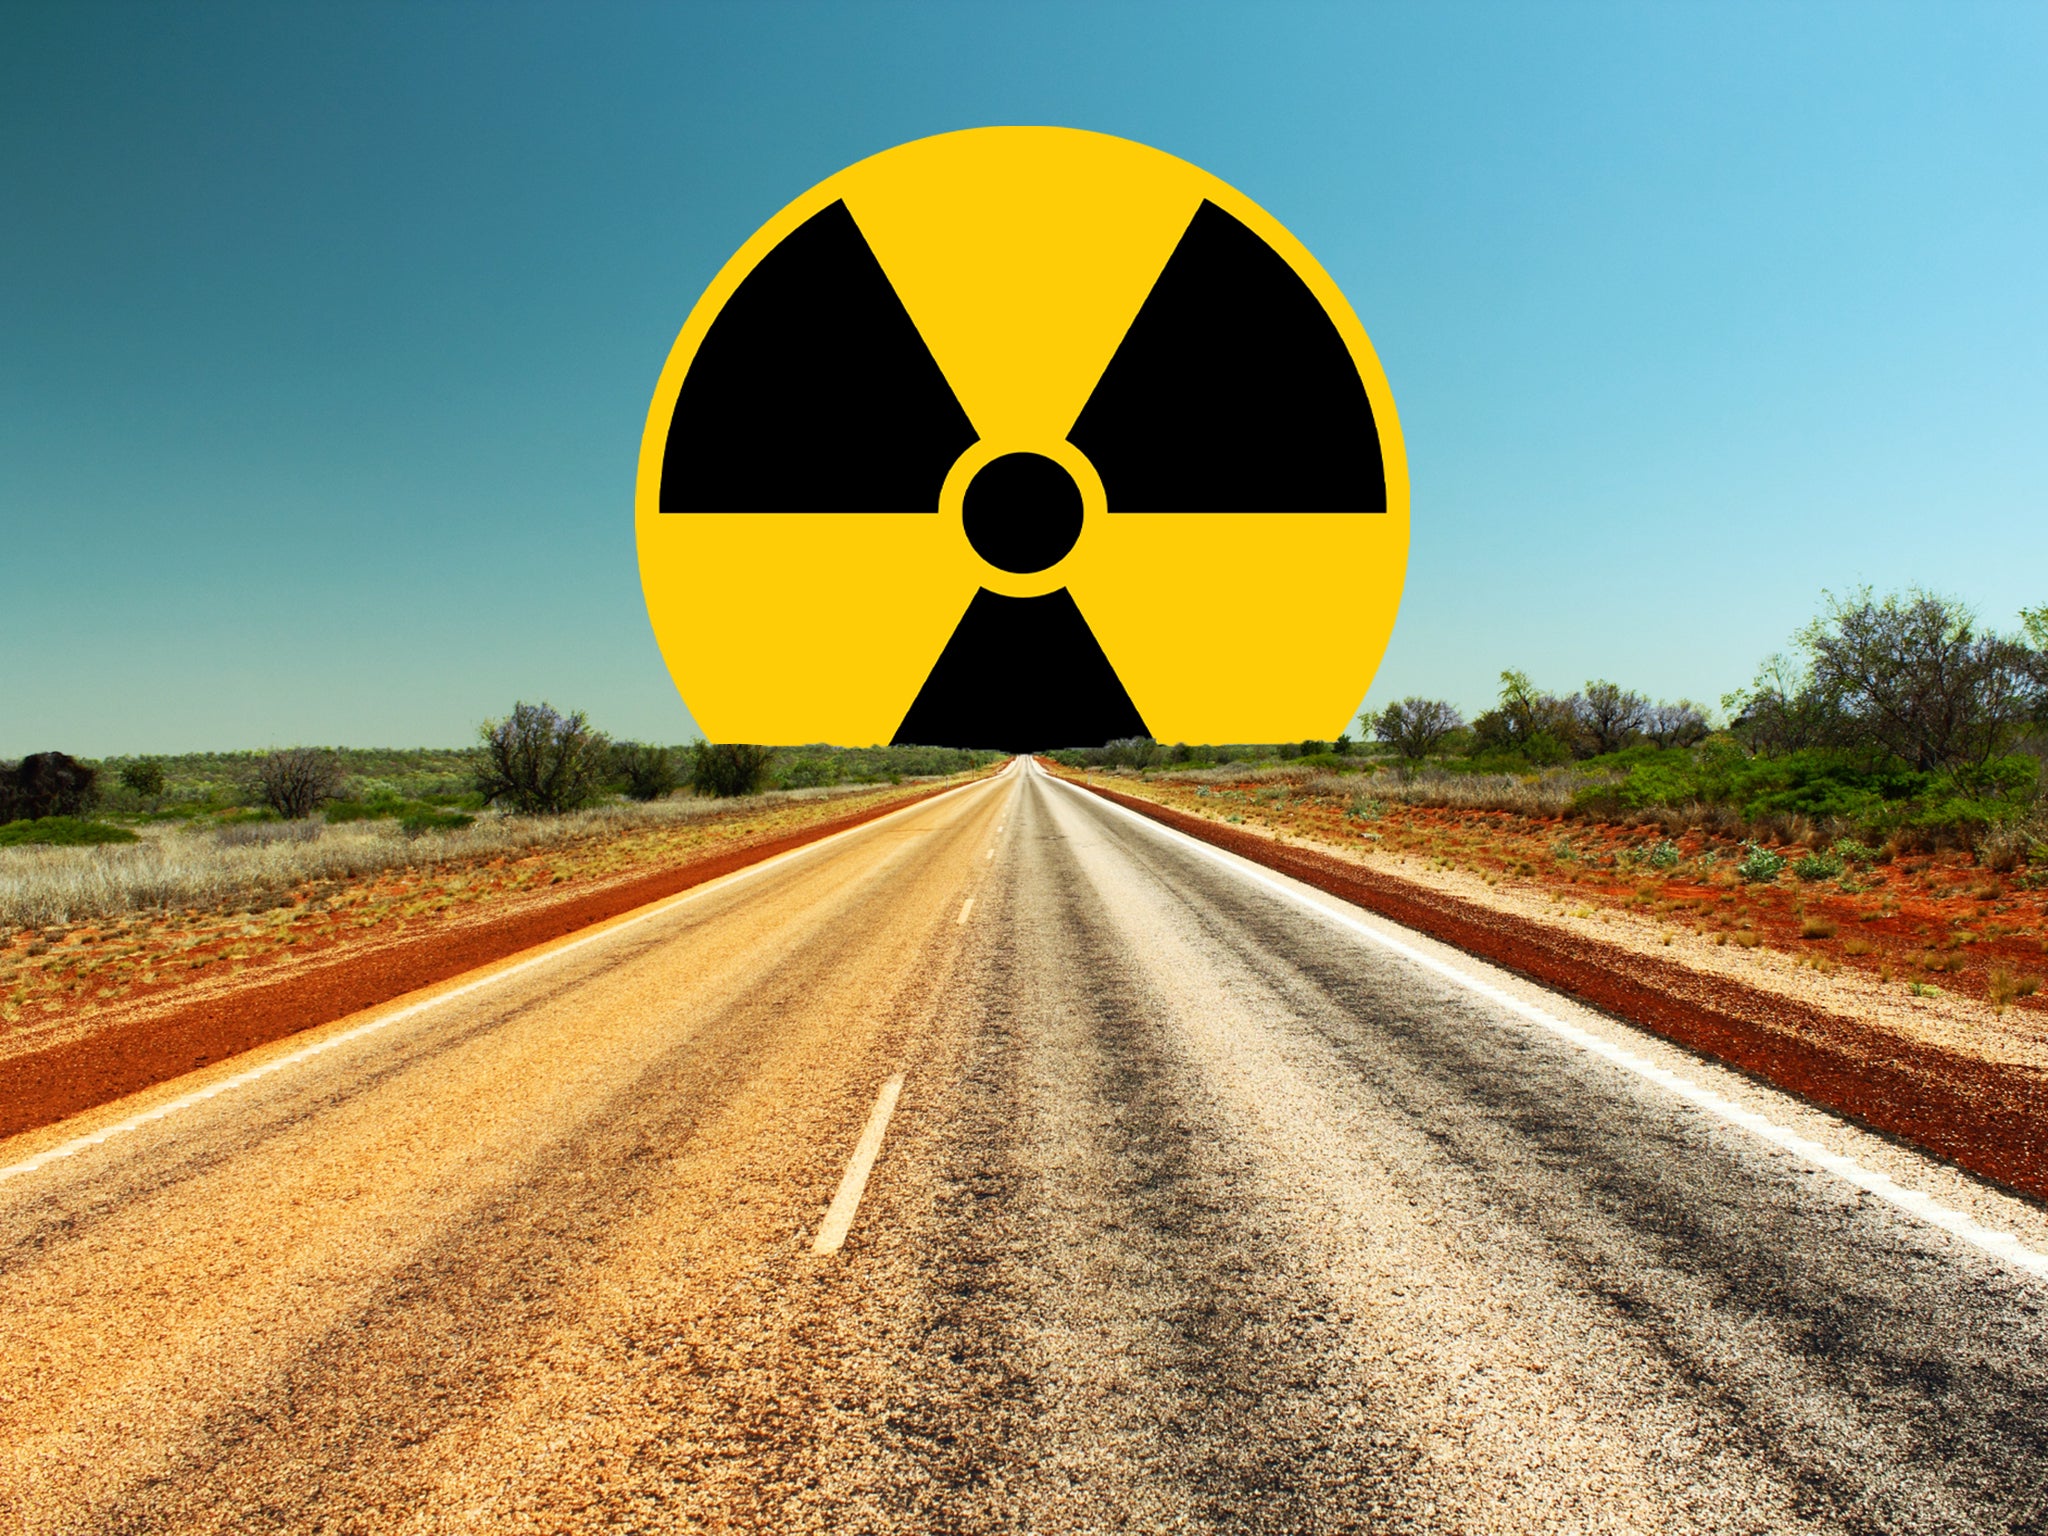 Radioactive material was lost somewhere between Perth and a mine 870 miles away